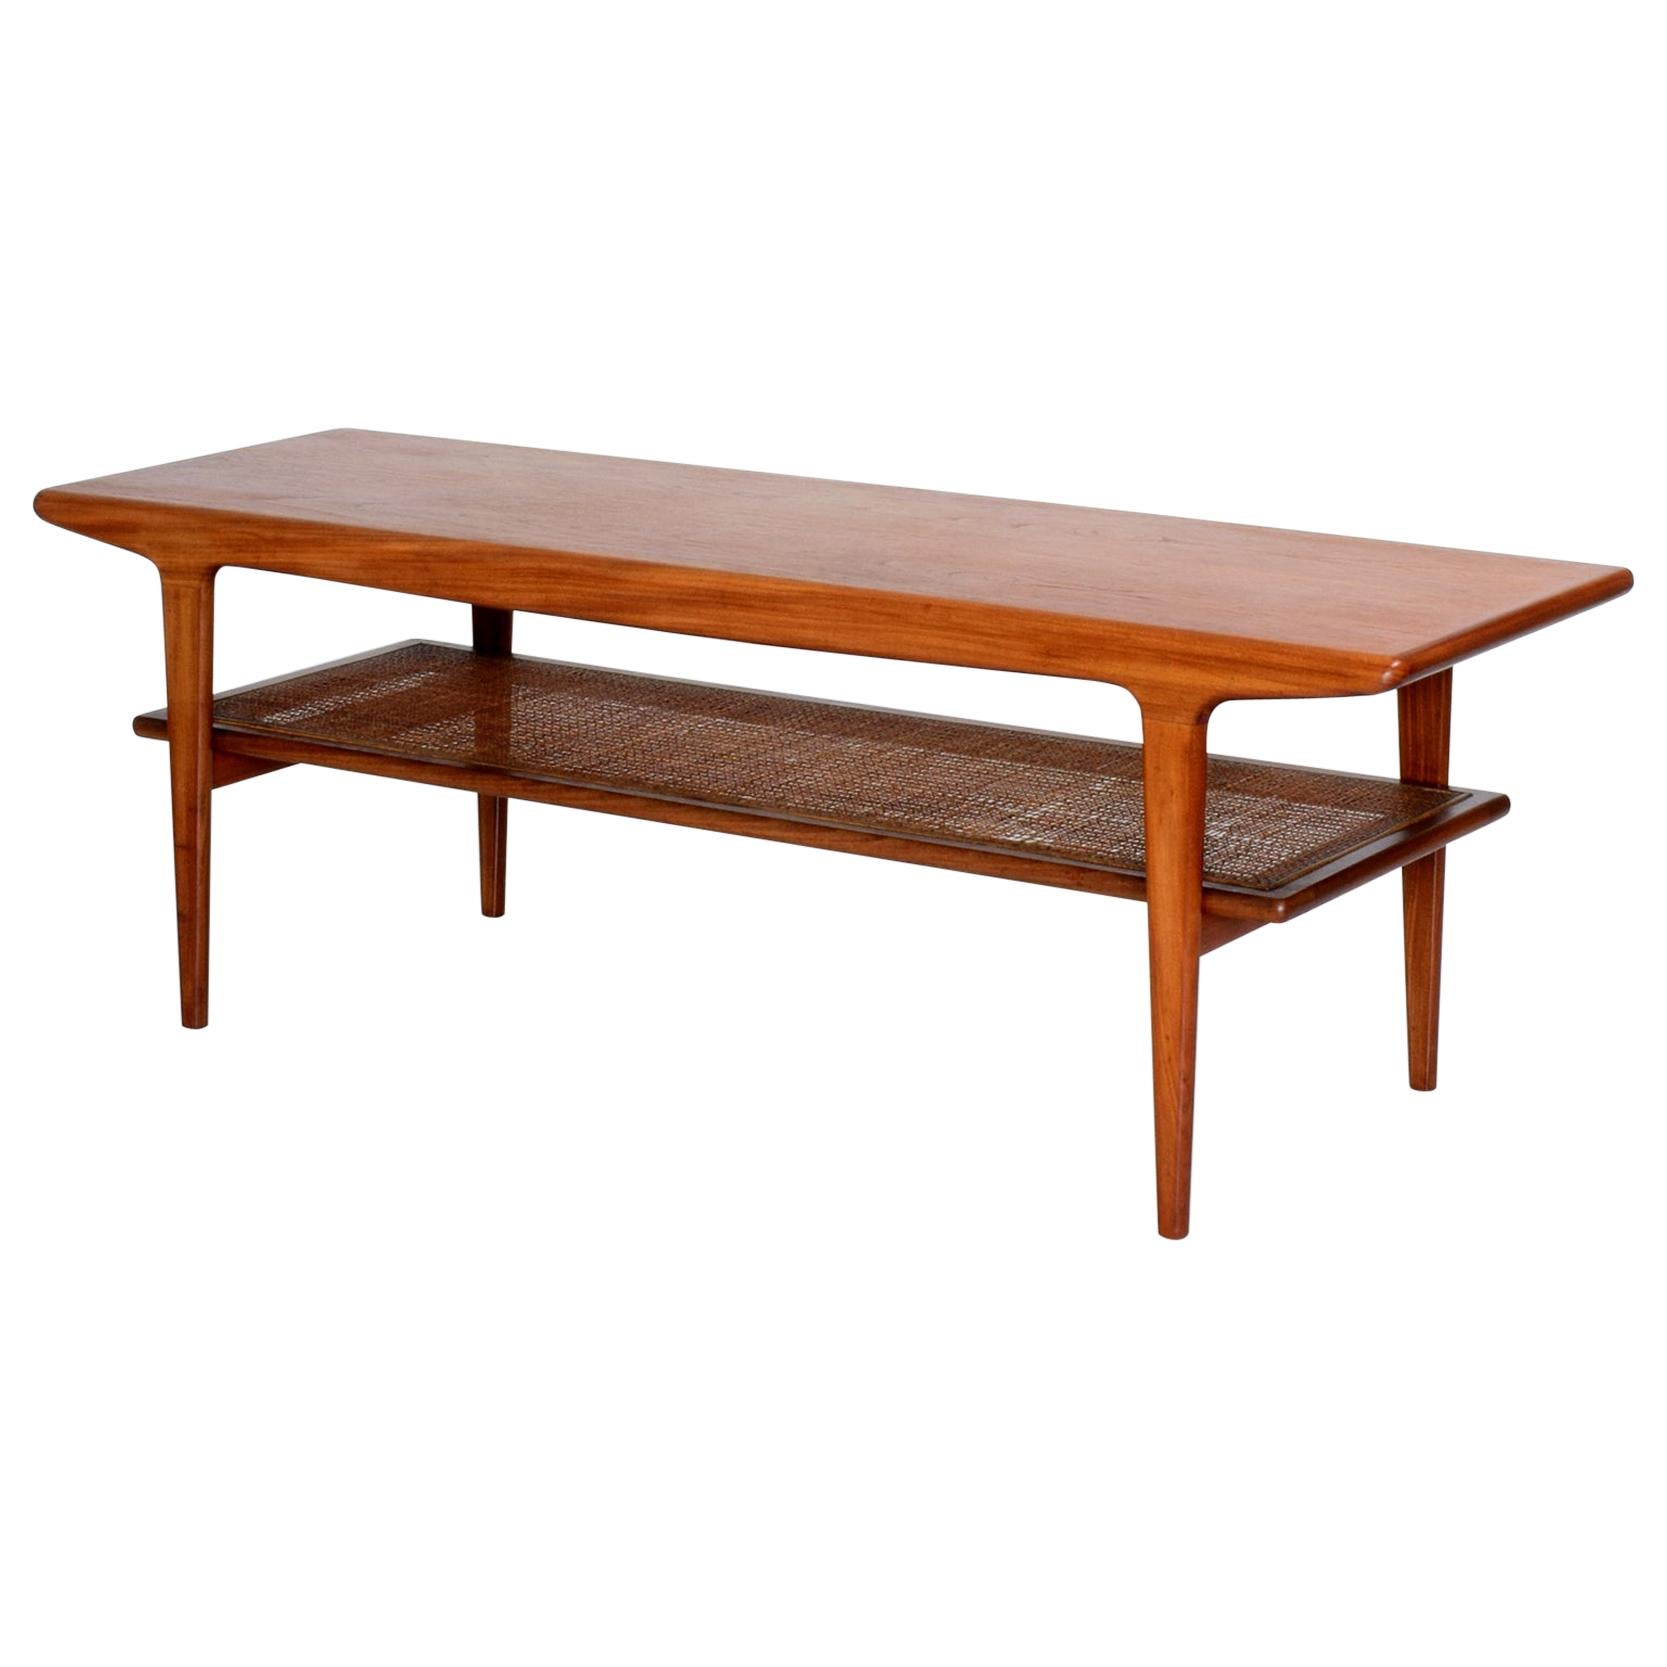 John Herbert for Younger, Mid Century Danish Style Teak and Cane Coffee Table